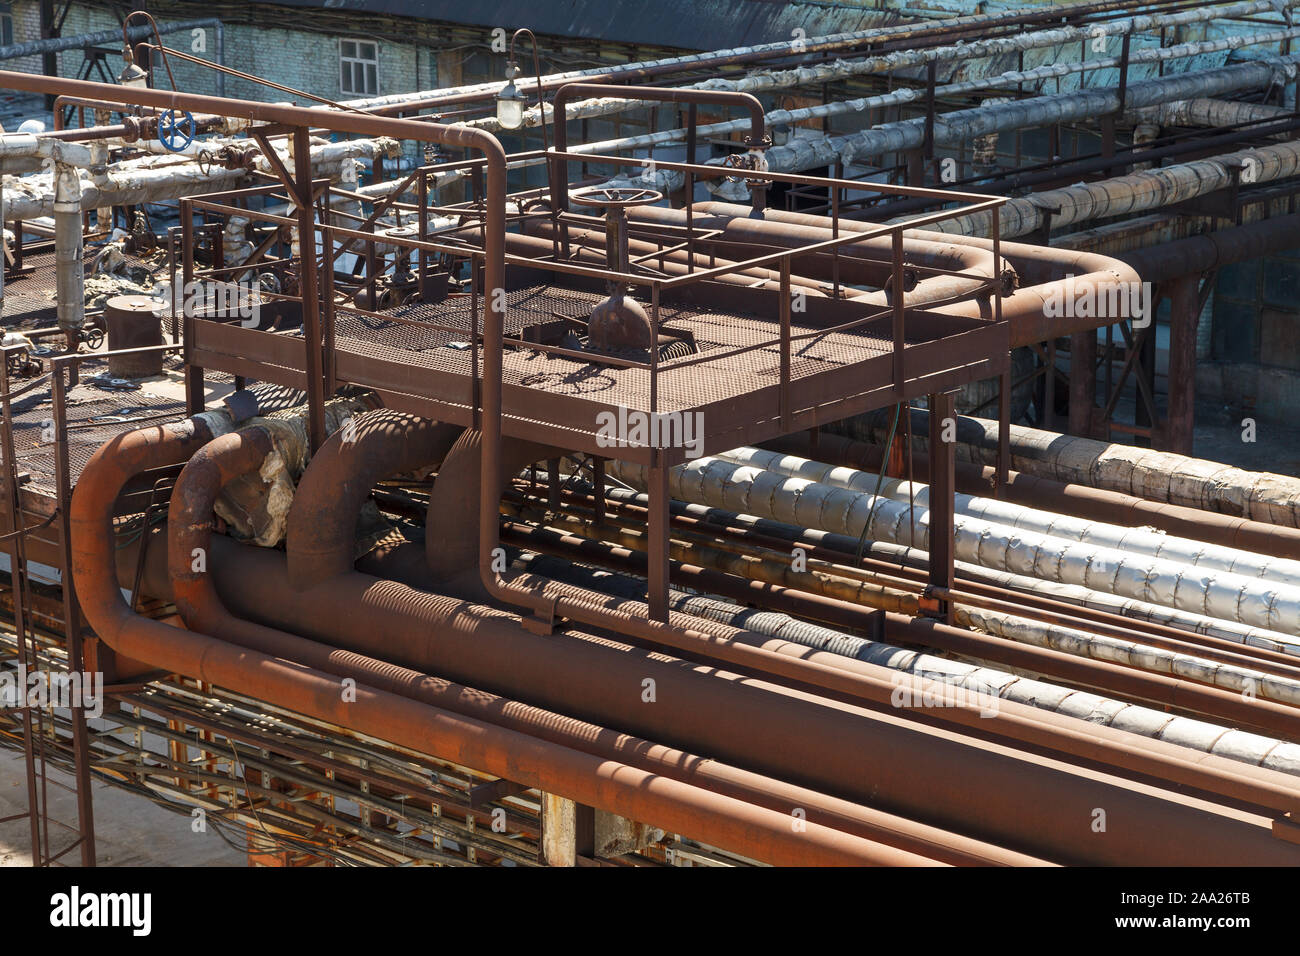 Old rusty pipelines at a chemical plant. Old factory. Industrial photography. Old factory horizontal photography. Metal planks and pipes. Stock Photo